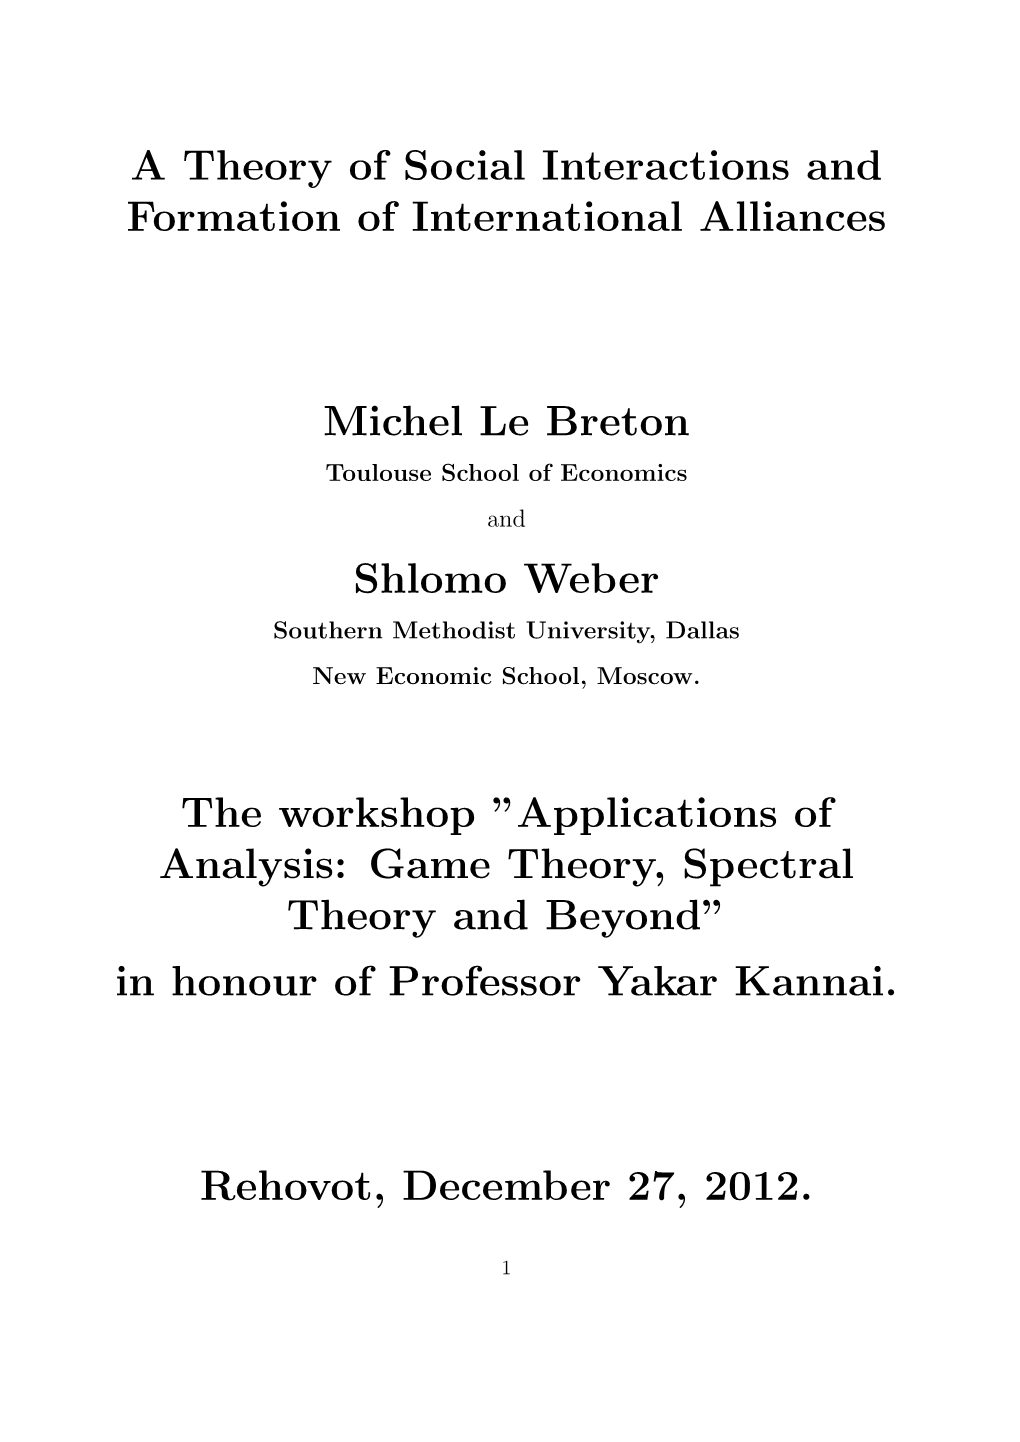 A Theory of Social Interactions and Formation of International Alliances